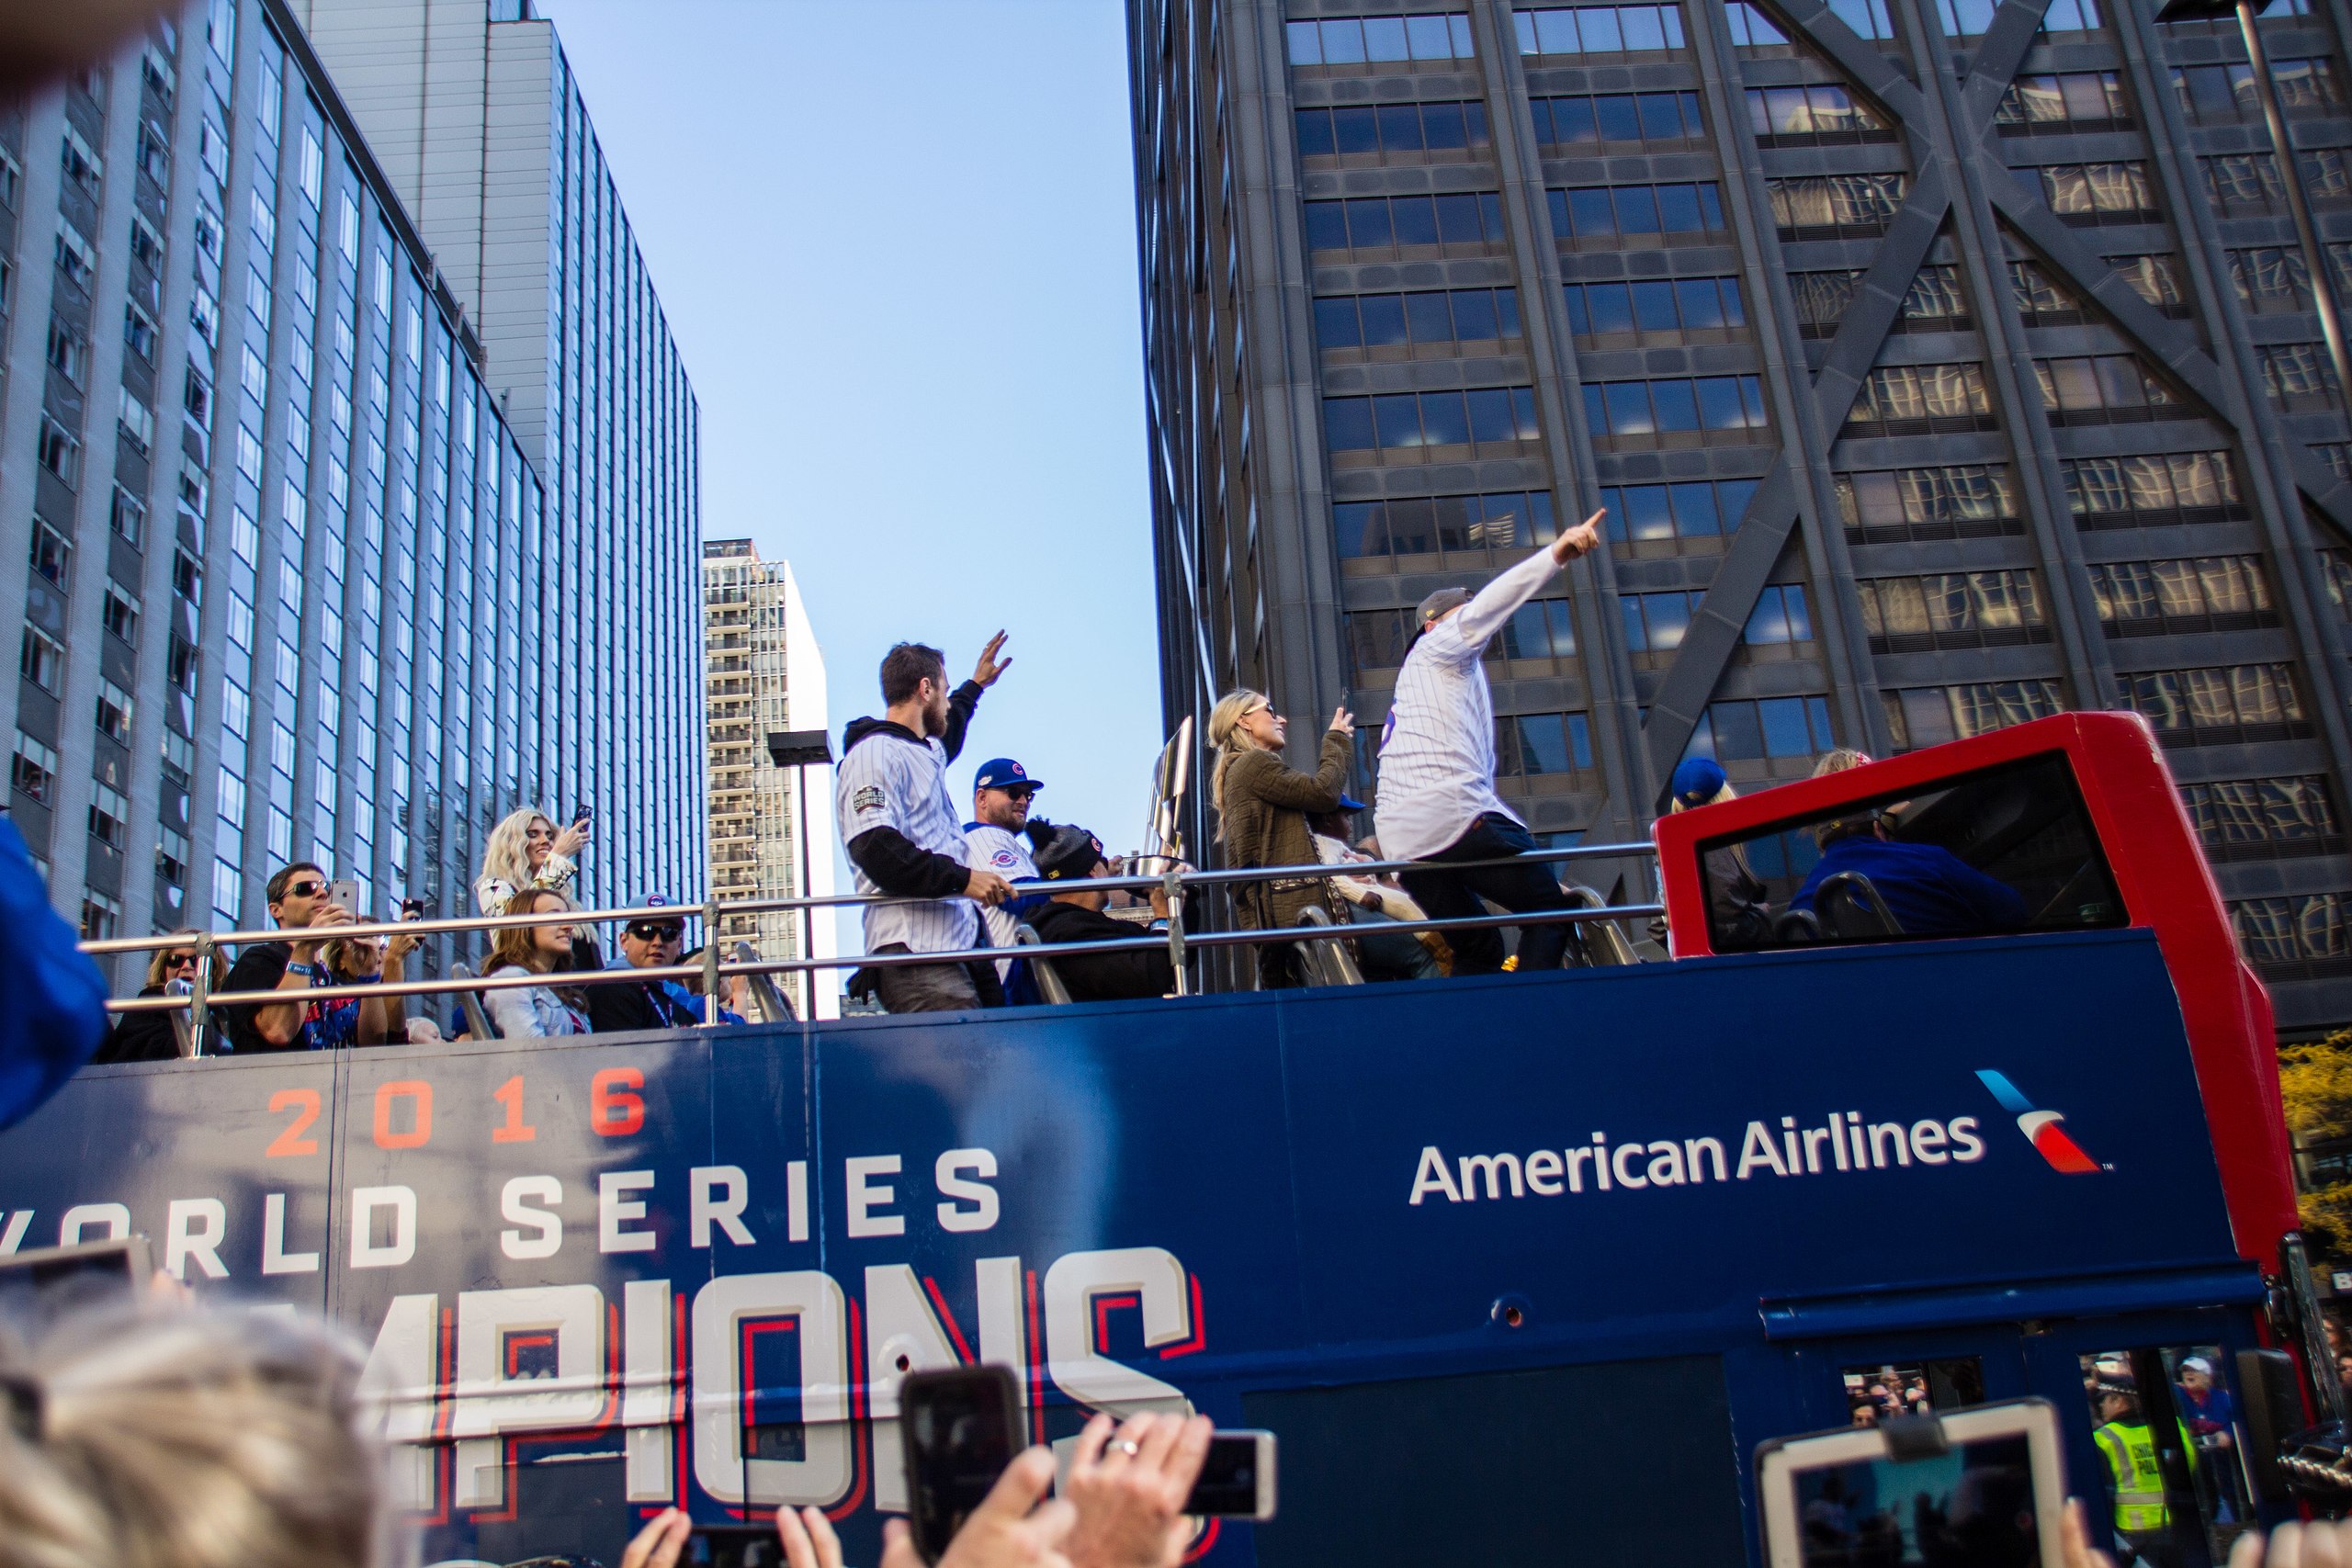 File:Cubs World Series Victory Parade (30146832074).jpg - Wikipedia